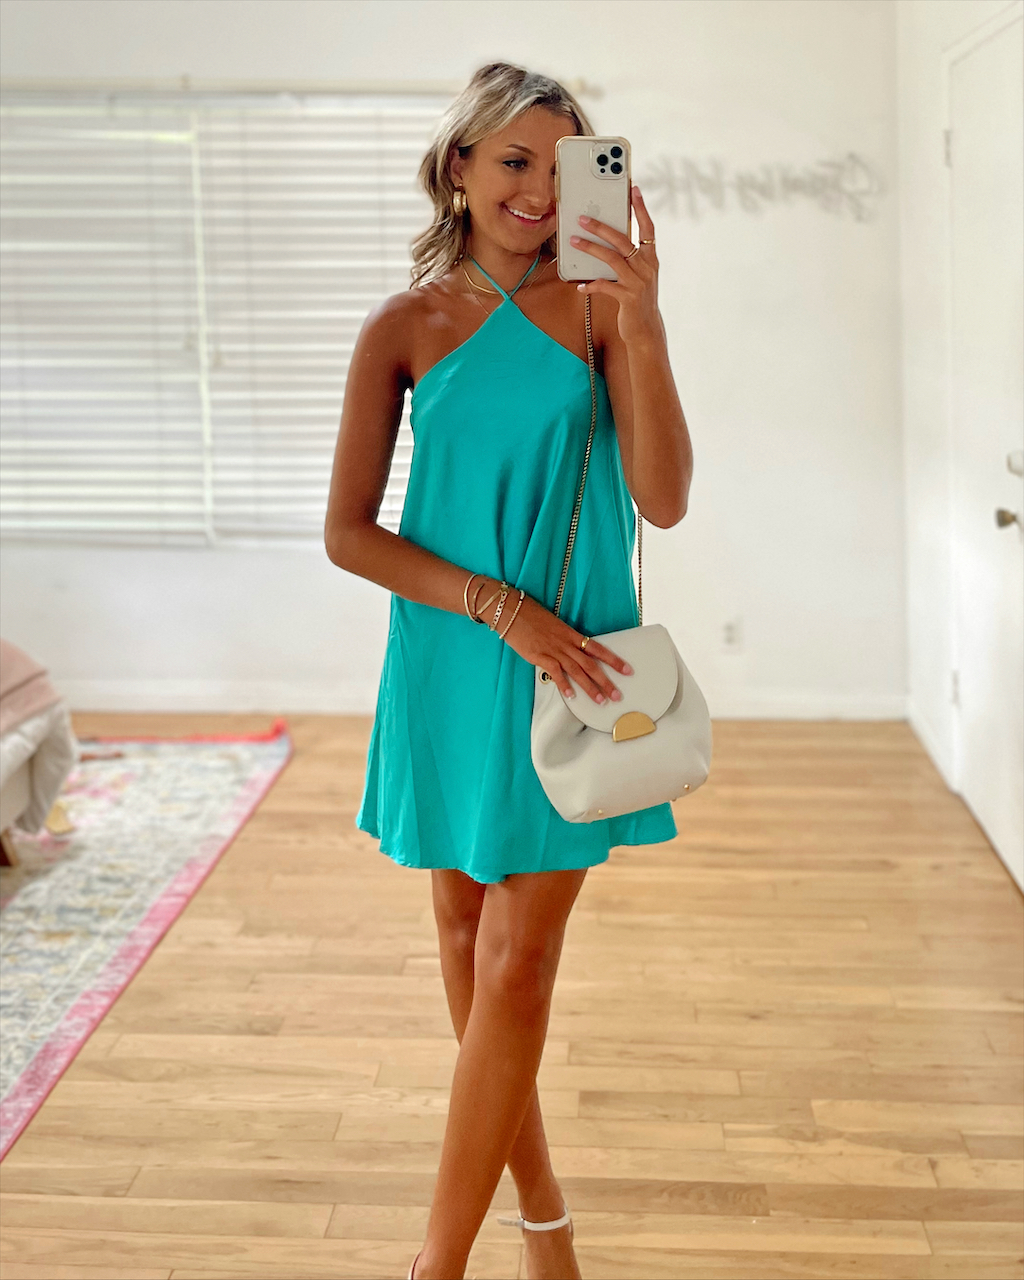 10 Outfit Ideas For Sisterhood Round of Sorority Recruitment